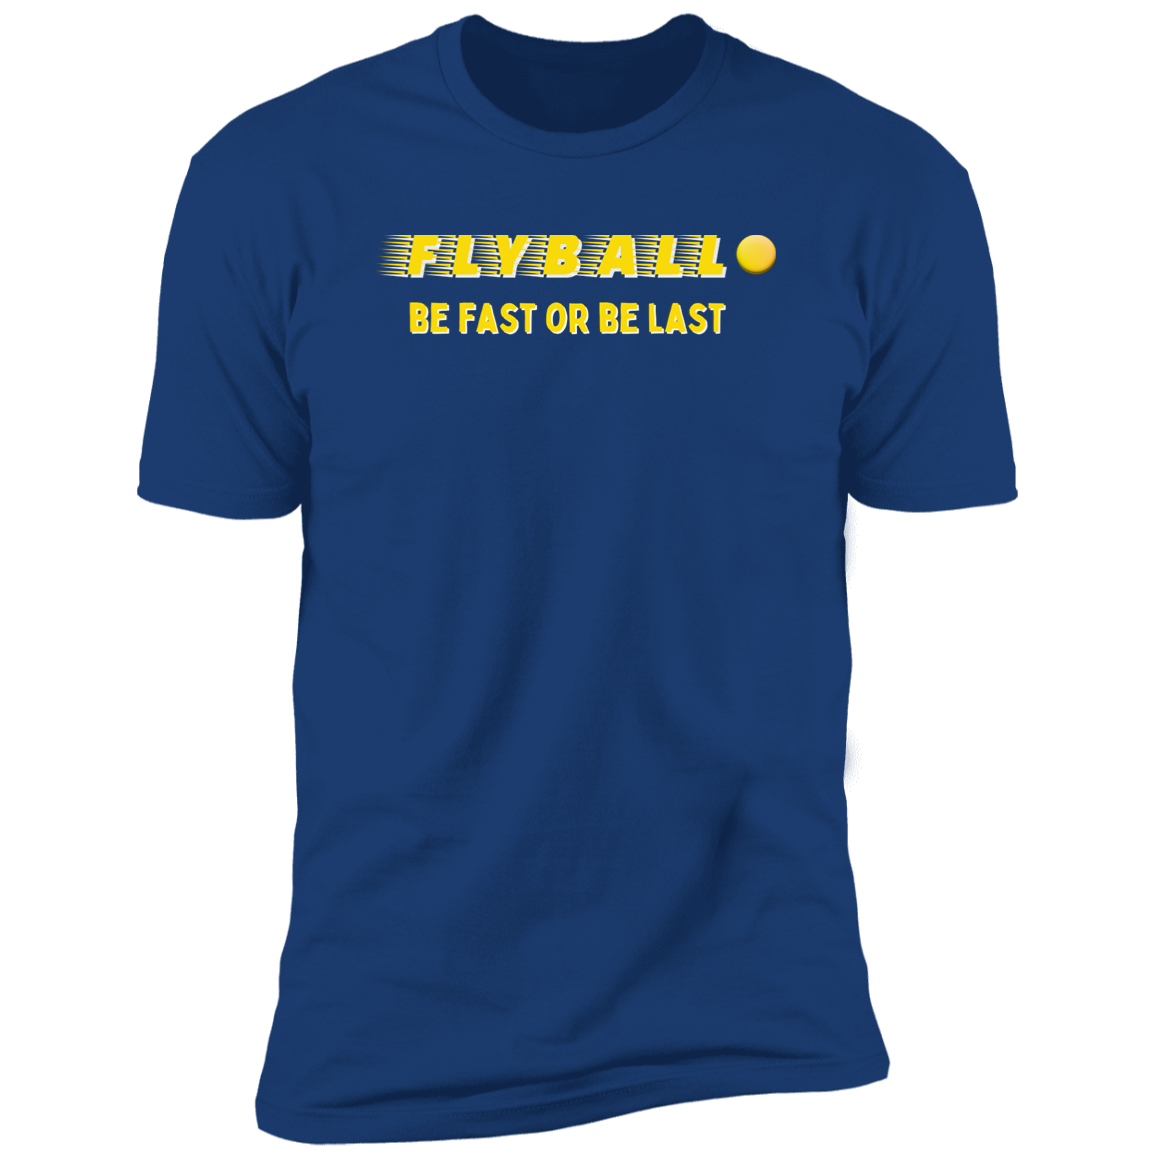 Flyball Be Fast or Be Last Dog Sport T-shirt, Flyball Shirt for humans, in royal blue